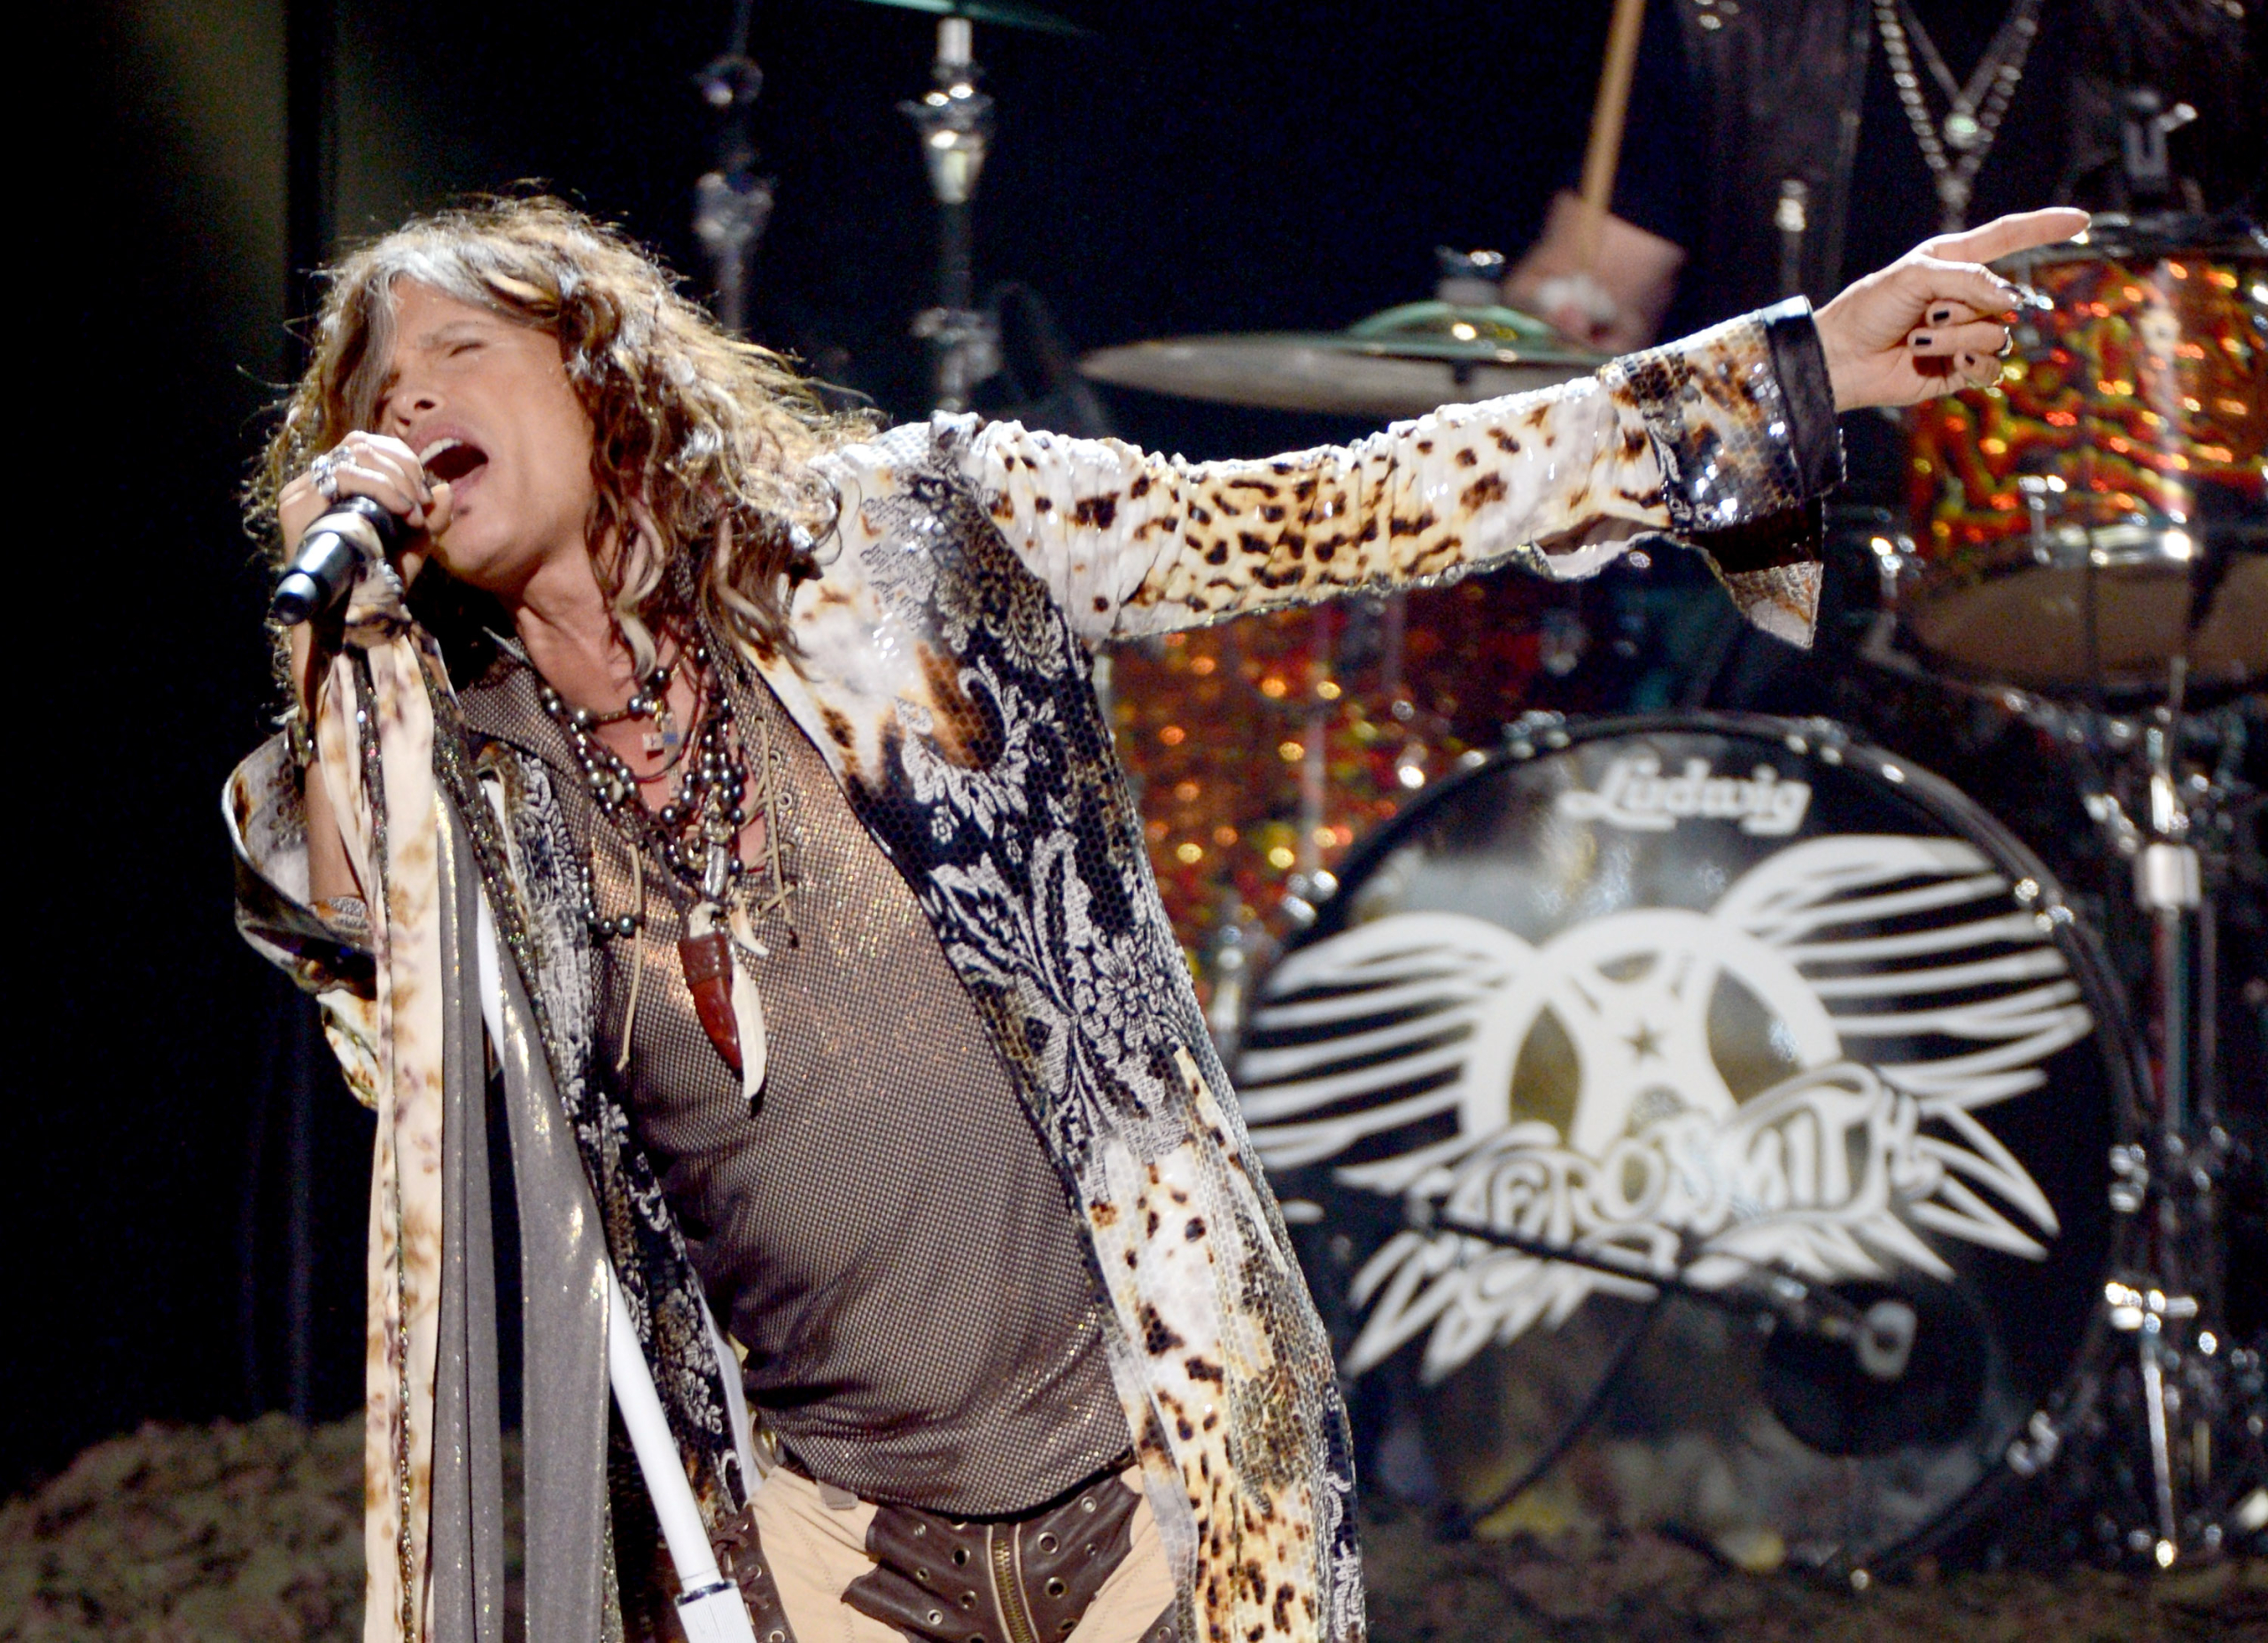 ICYMI Steven Tyler joins Eminem performance at Rock n Roll Hall of Fame